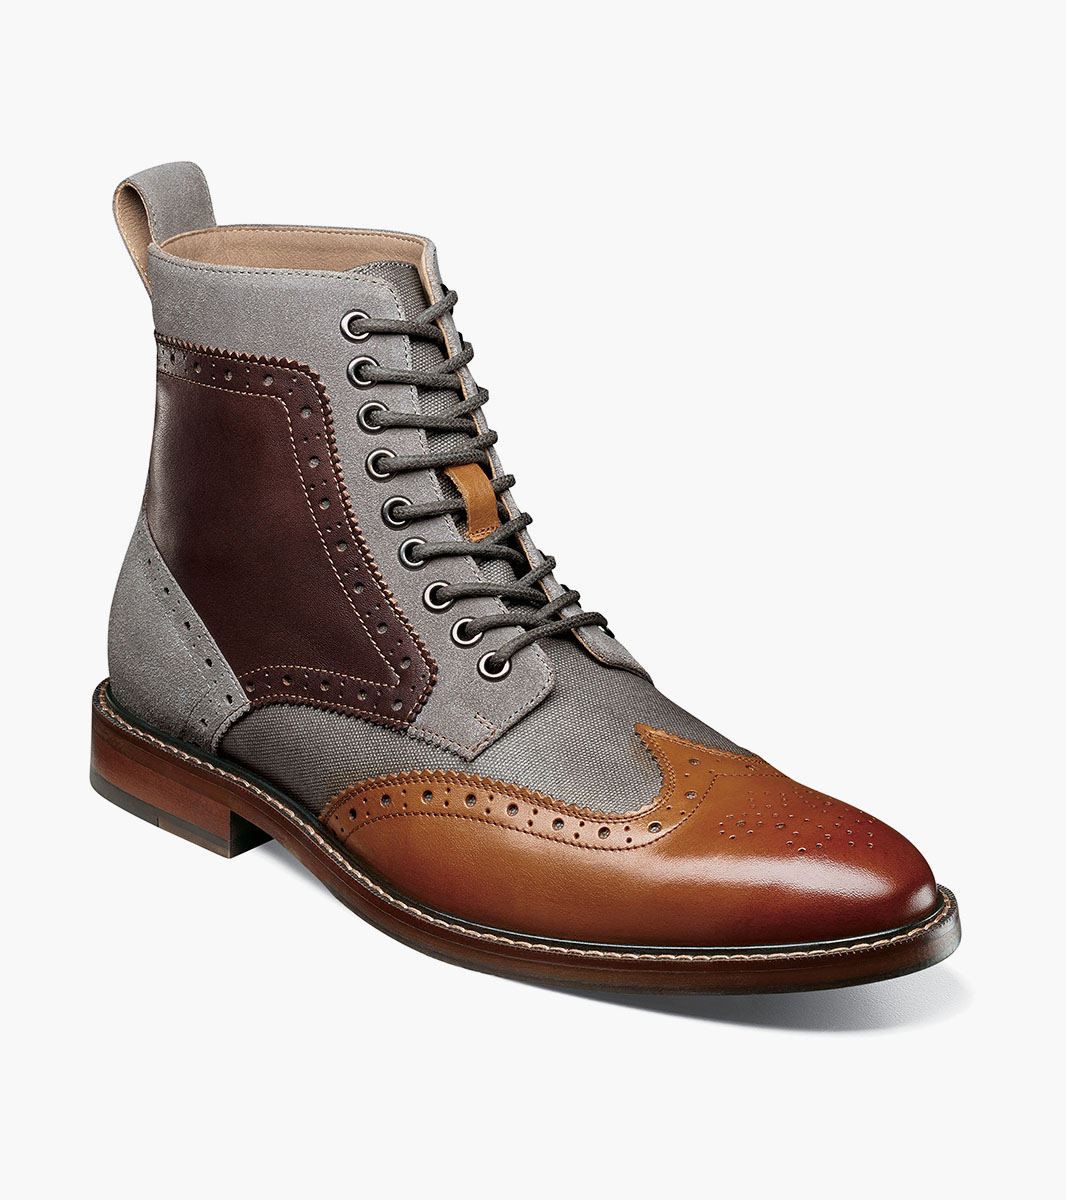 STACY ADAMS Mens Finnegan Wingtip Lace-up Boot Fashion